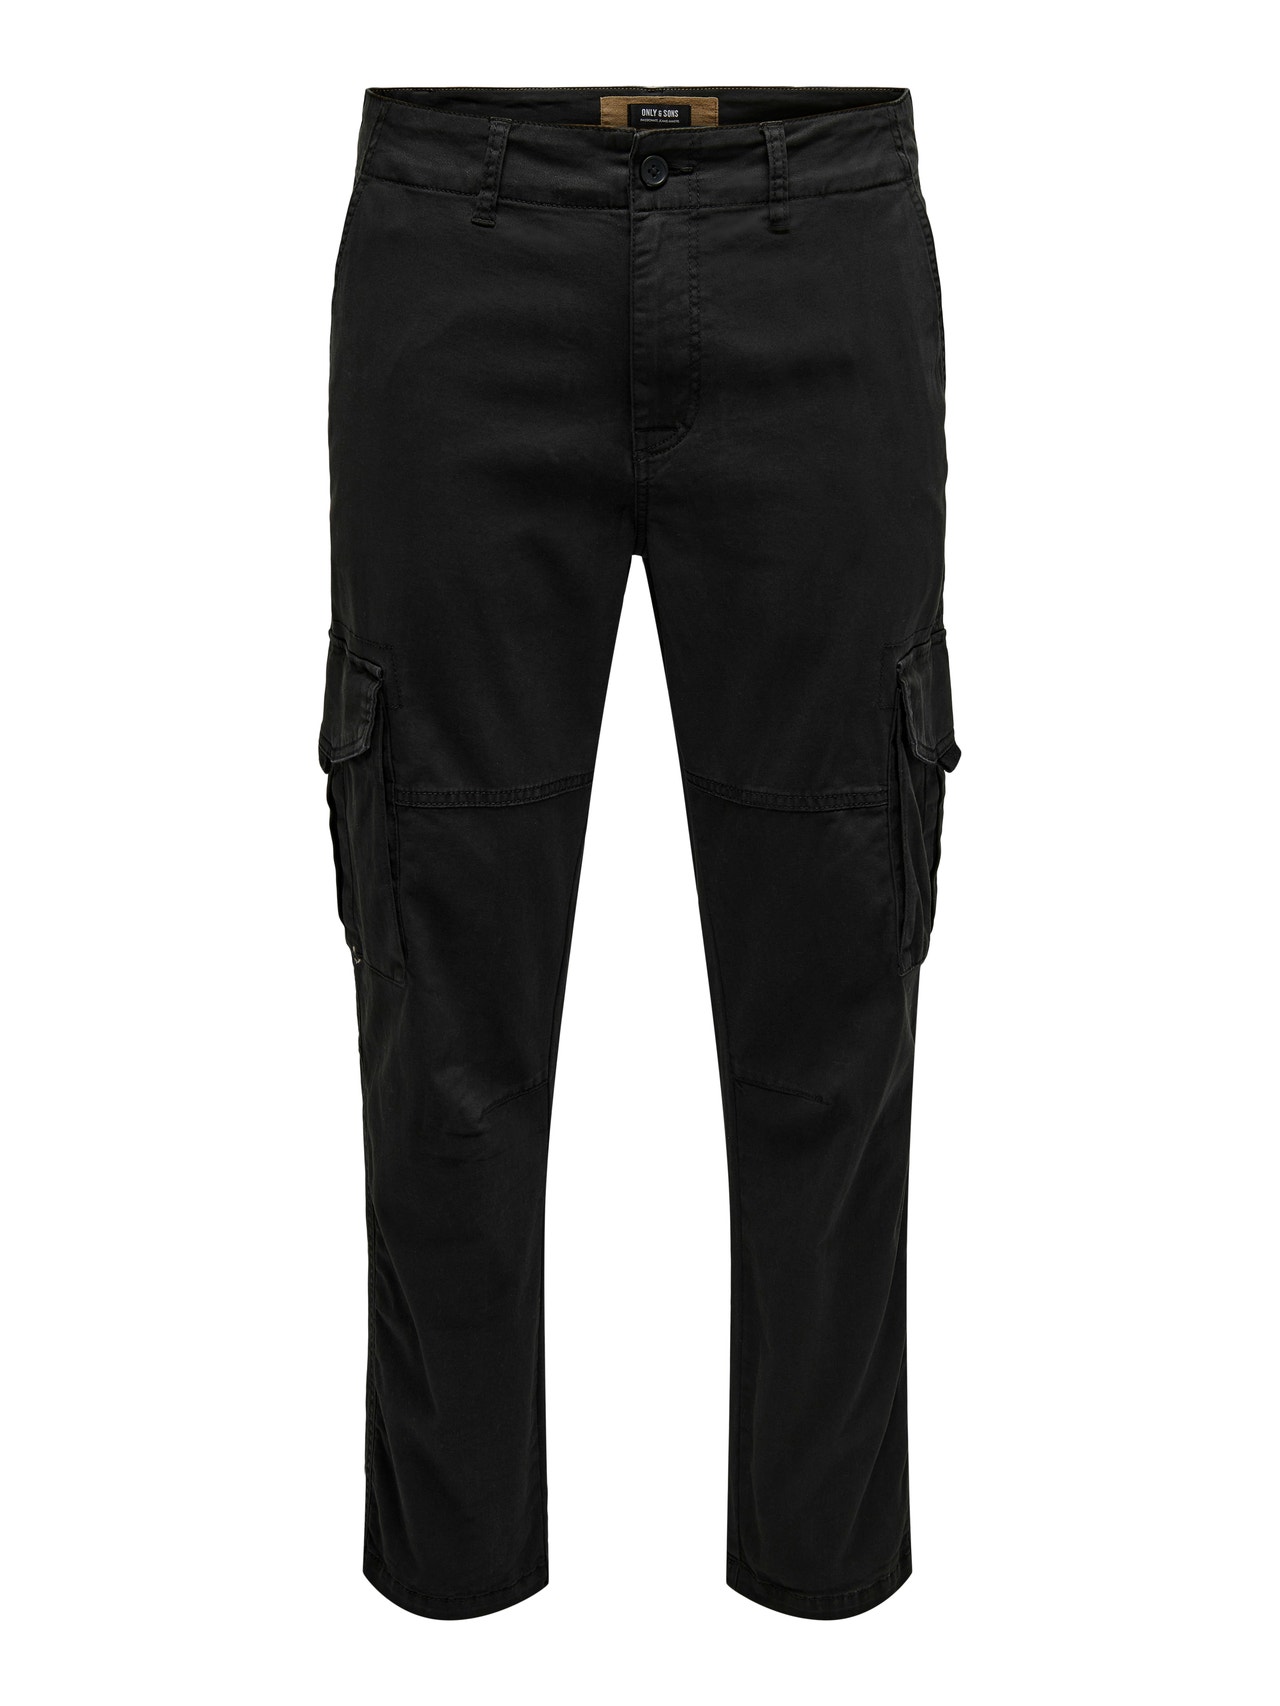 ONLY & SONS ONSDEAN LIFE TAP CARGO 0032 PANT NOOS -Navy Blazer - 22025431